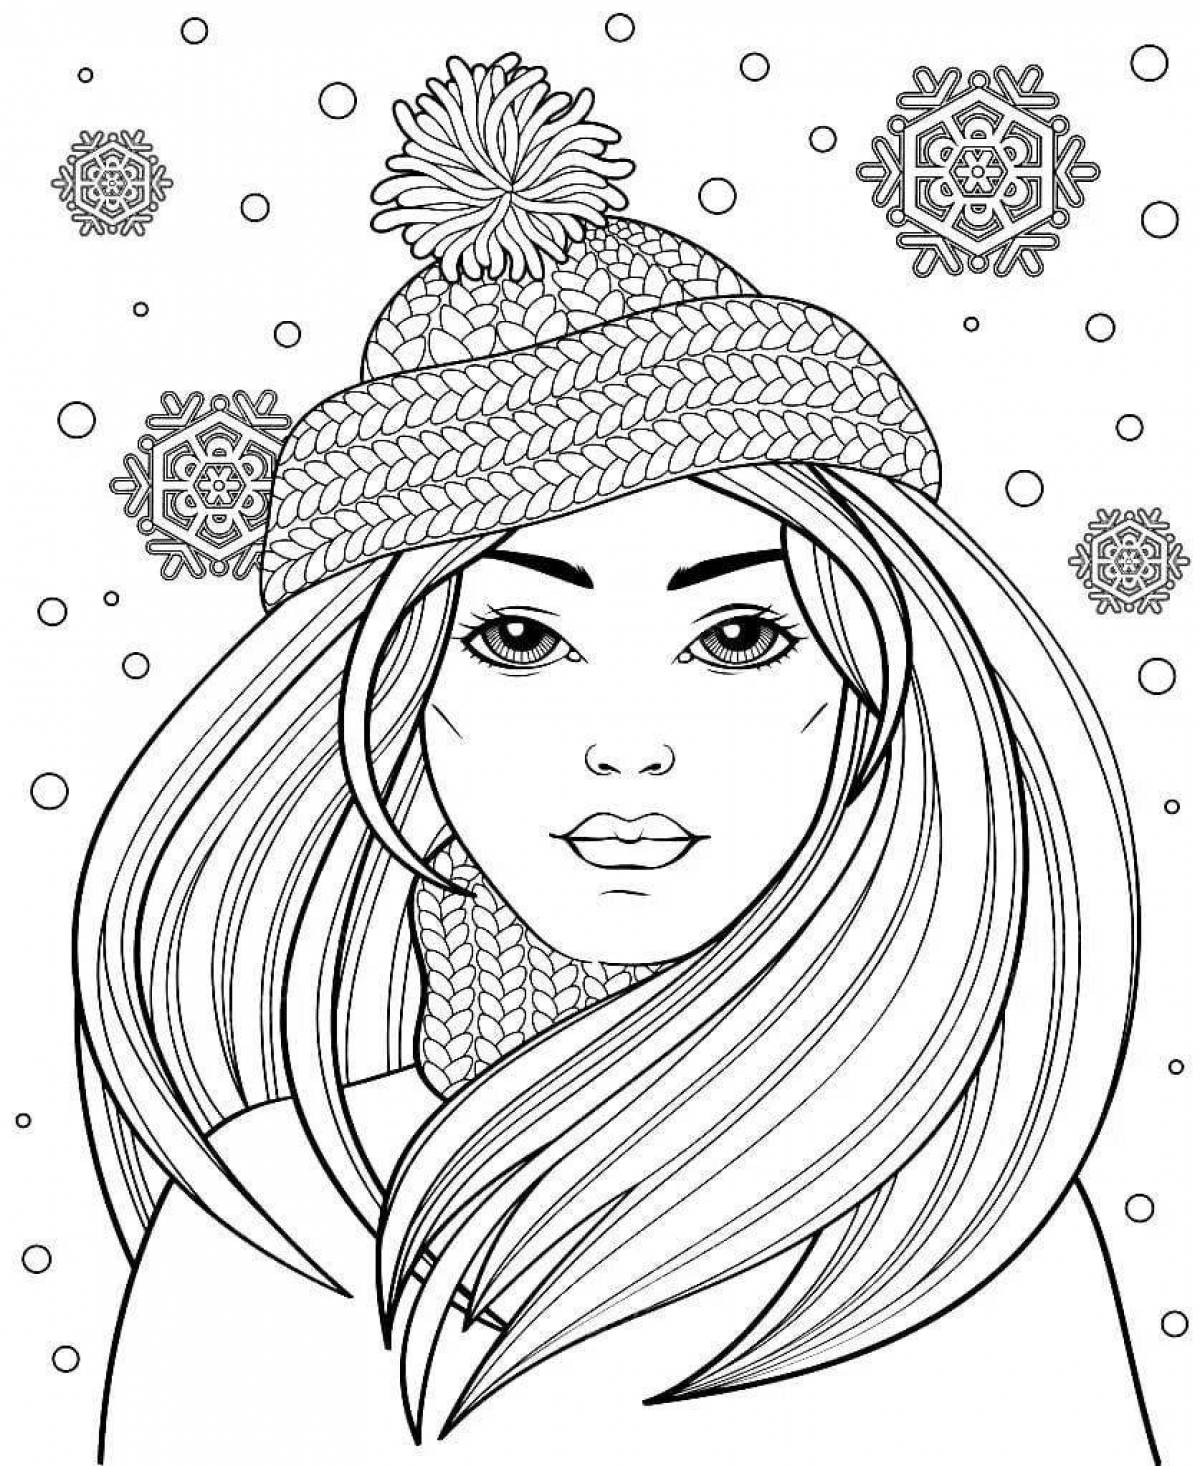 Gorgeous Christmas coloring book for girls 12 years old